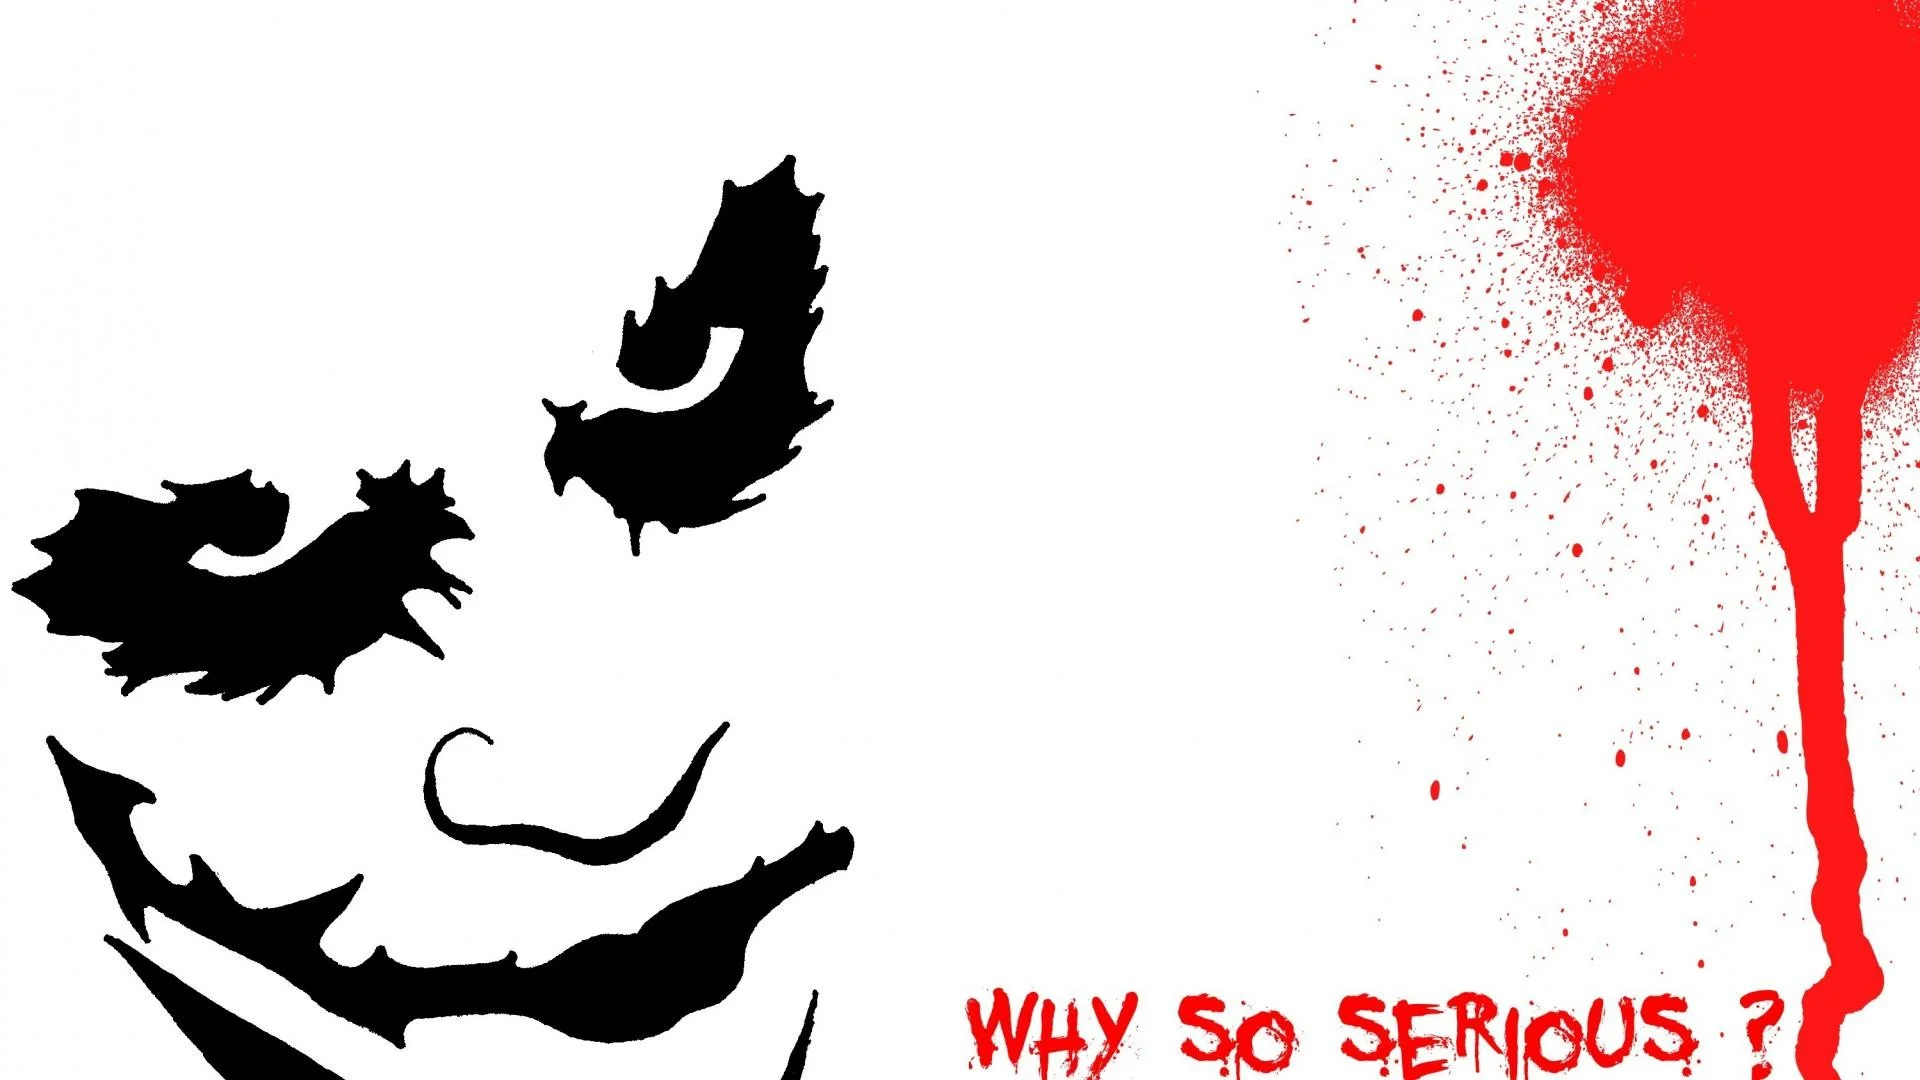 HD wallpaper: Why so serious? wallpaper, The Dark Knight, close-up, red,  one person | Wallpaper Flare